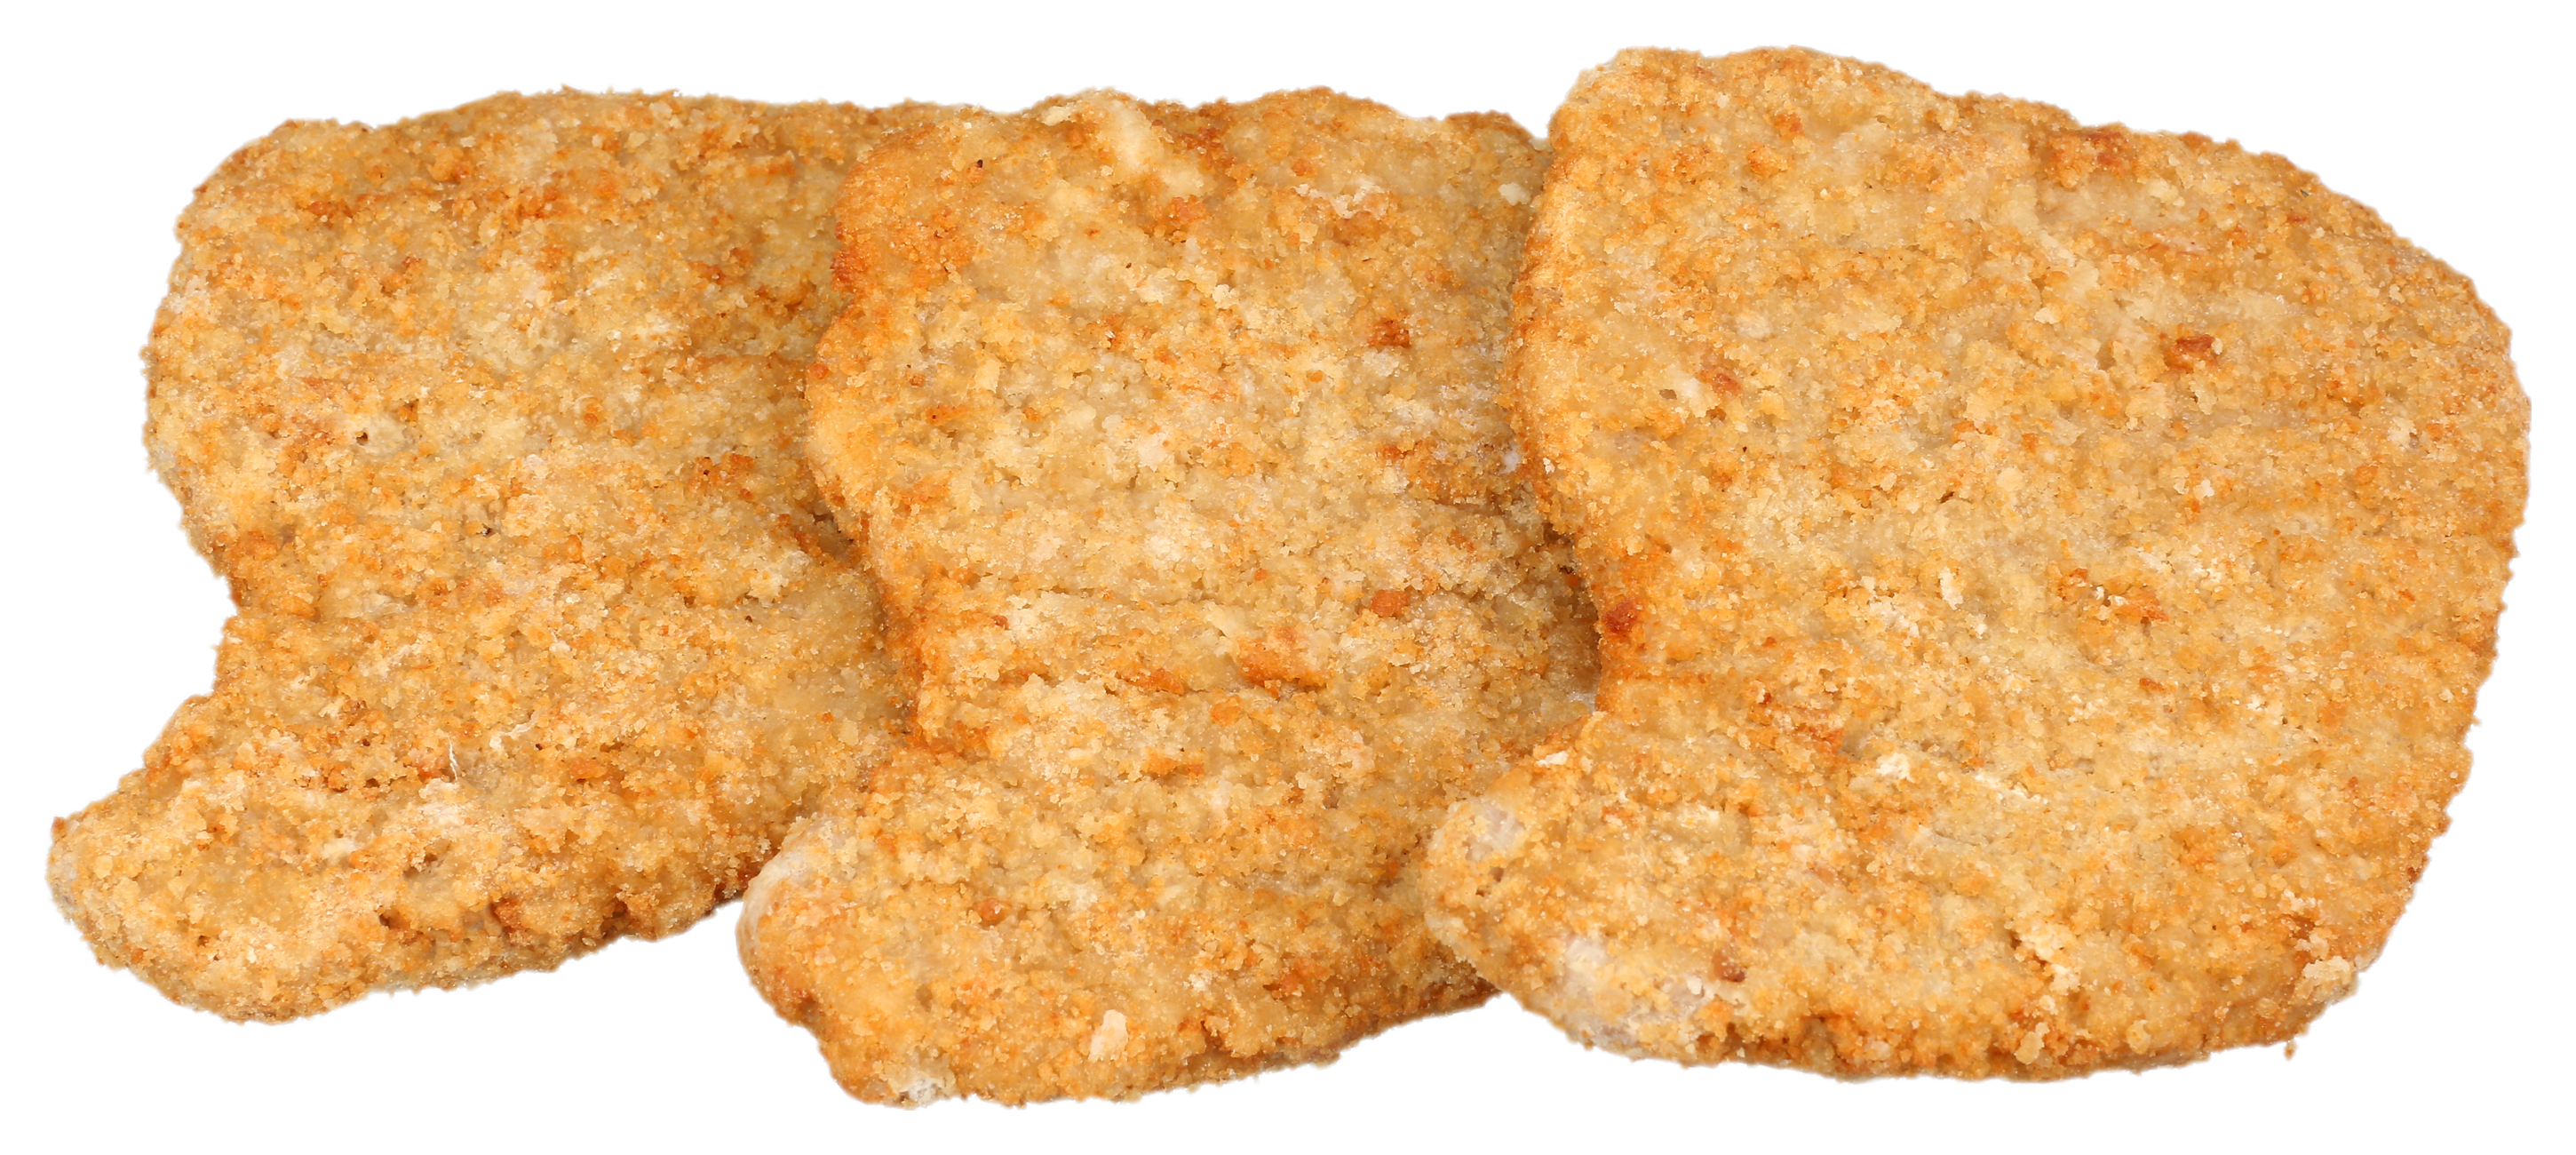 AdvancePierre™ Fully Cooked Whole Grain Breaded Pork Patties, 3.75 ozhttp://images.salsify.com/image/upload/s--x4RFC7fA--/qdt6benwdmekpf7wy0bw.webp